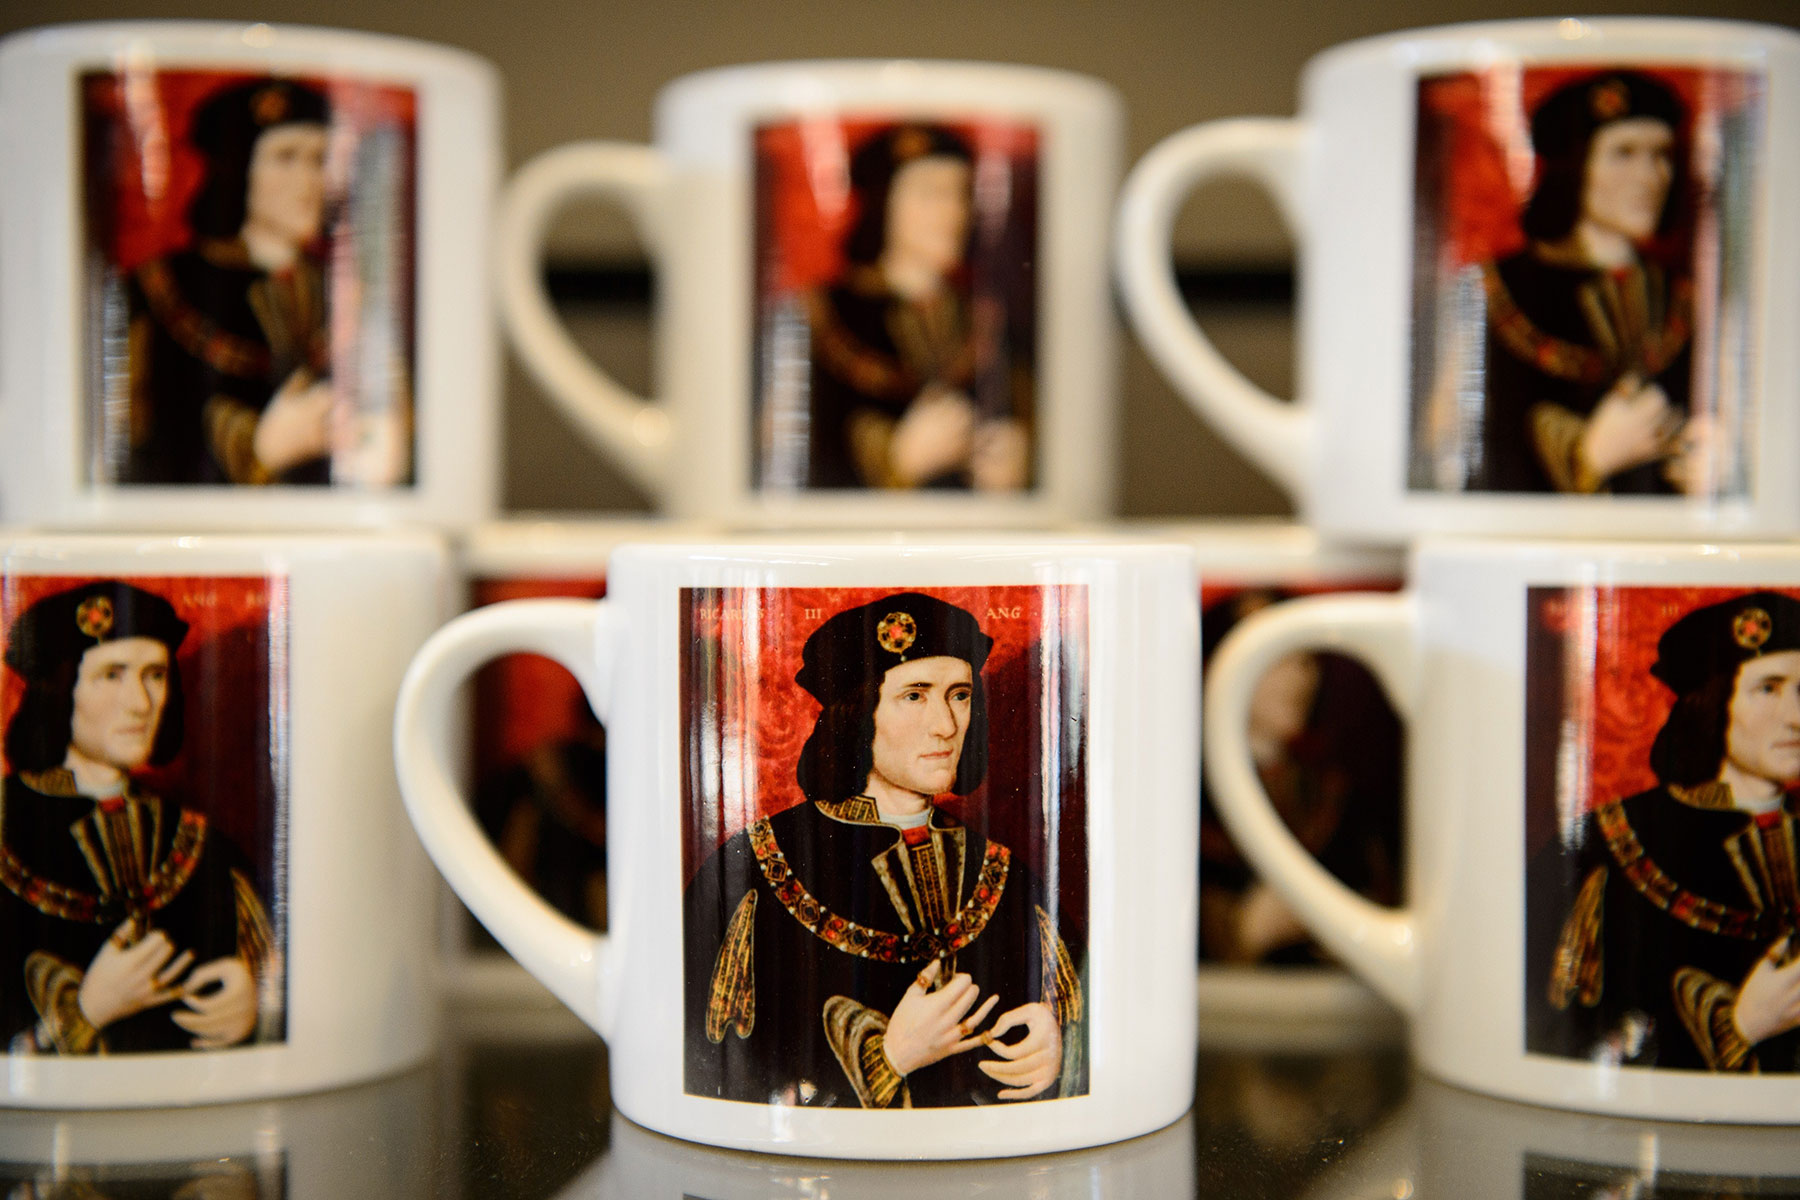 Souvenirs from the King Richard III visitor centre in Leicester.